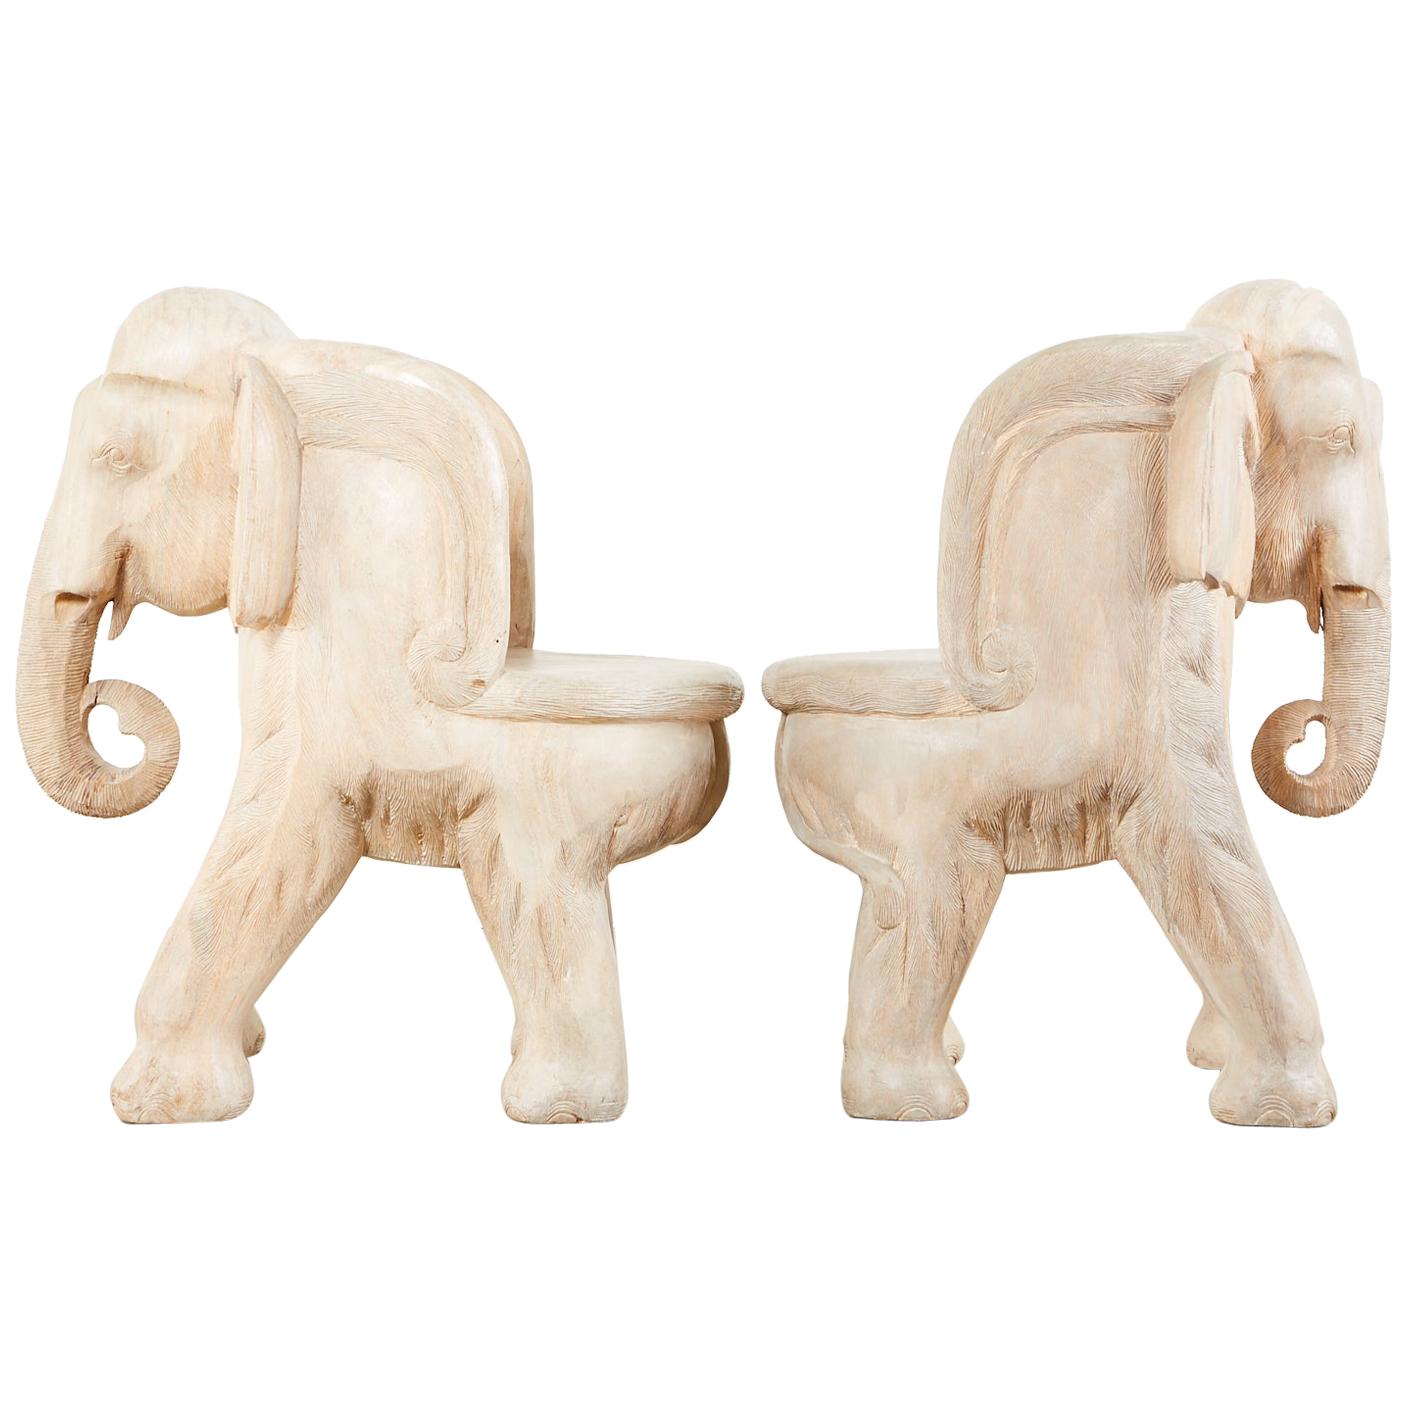 Pair of Hand Carved Bleached Hardwood Elephant Chairs